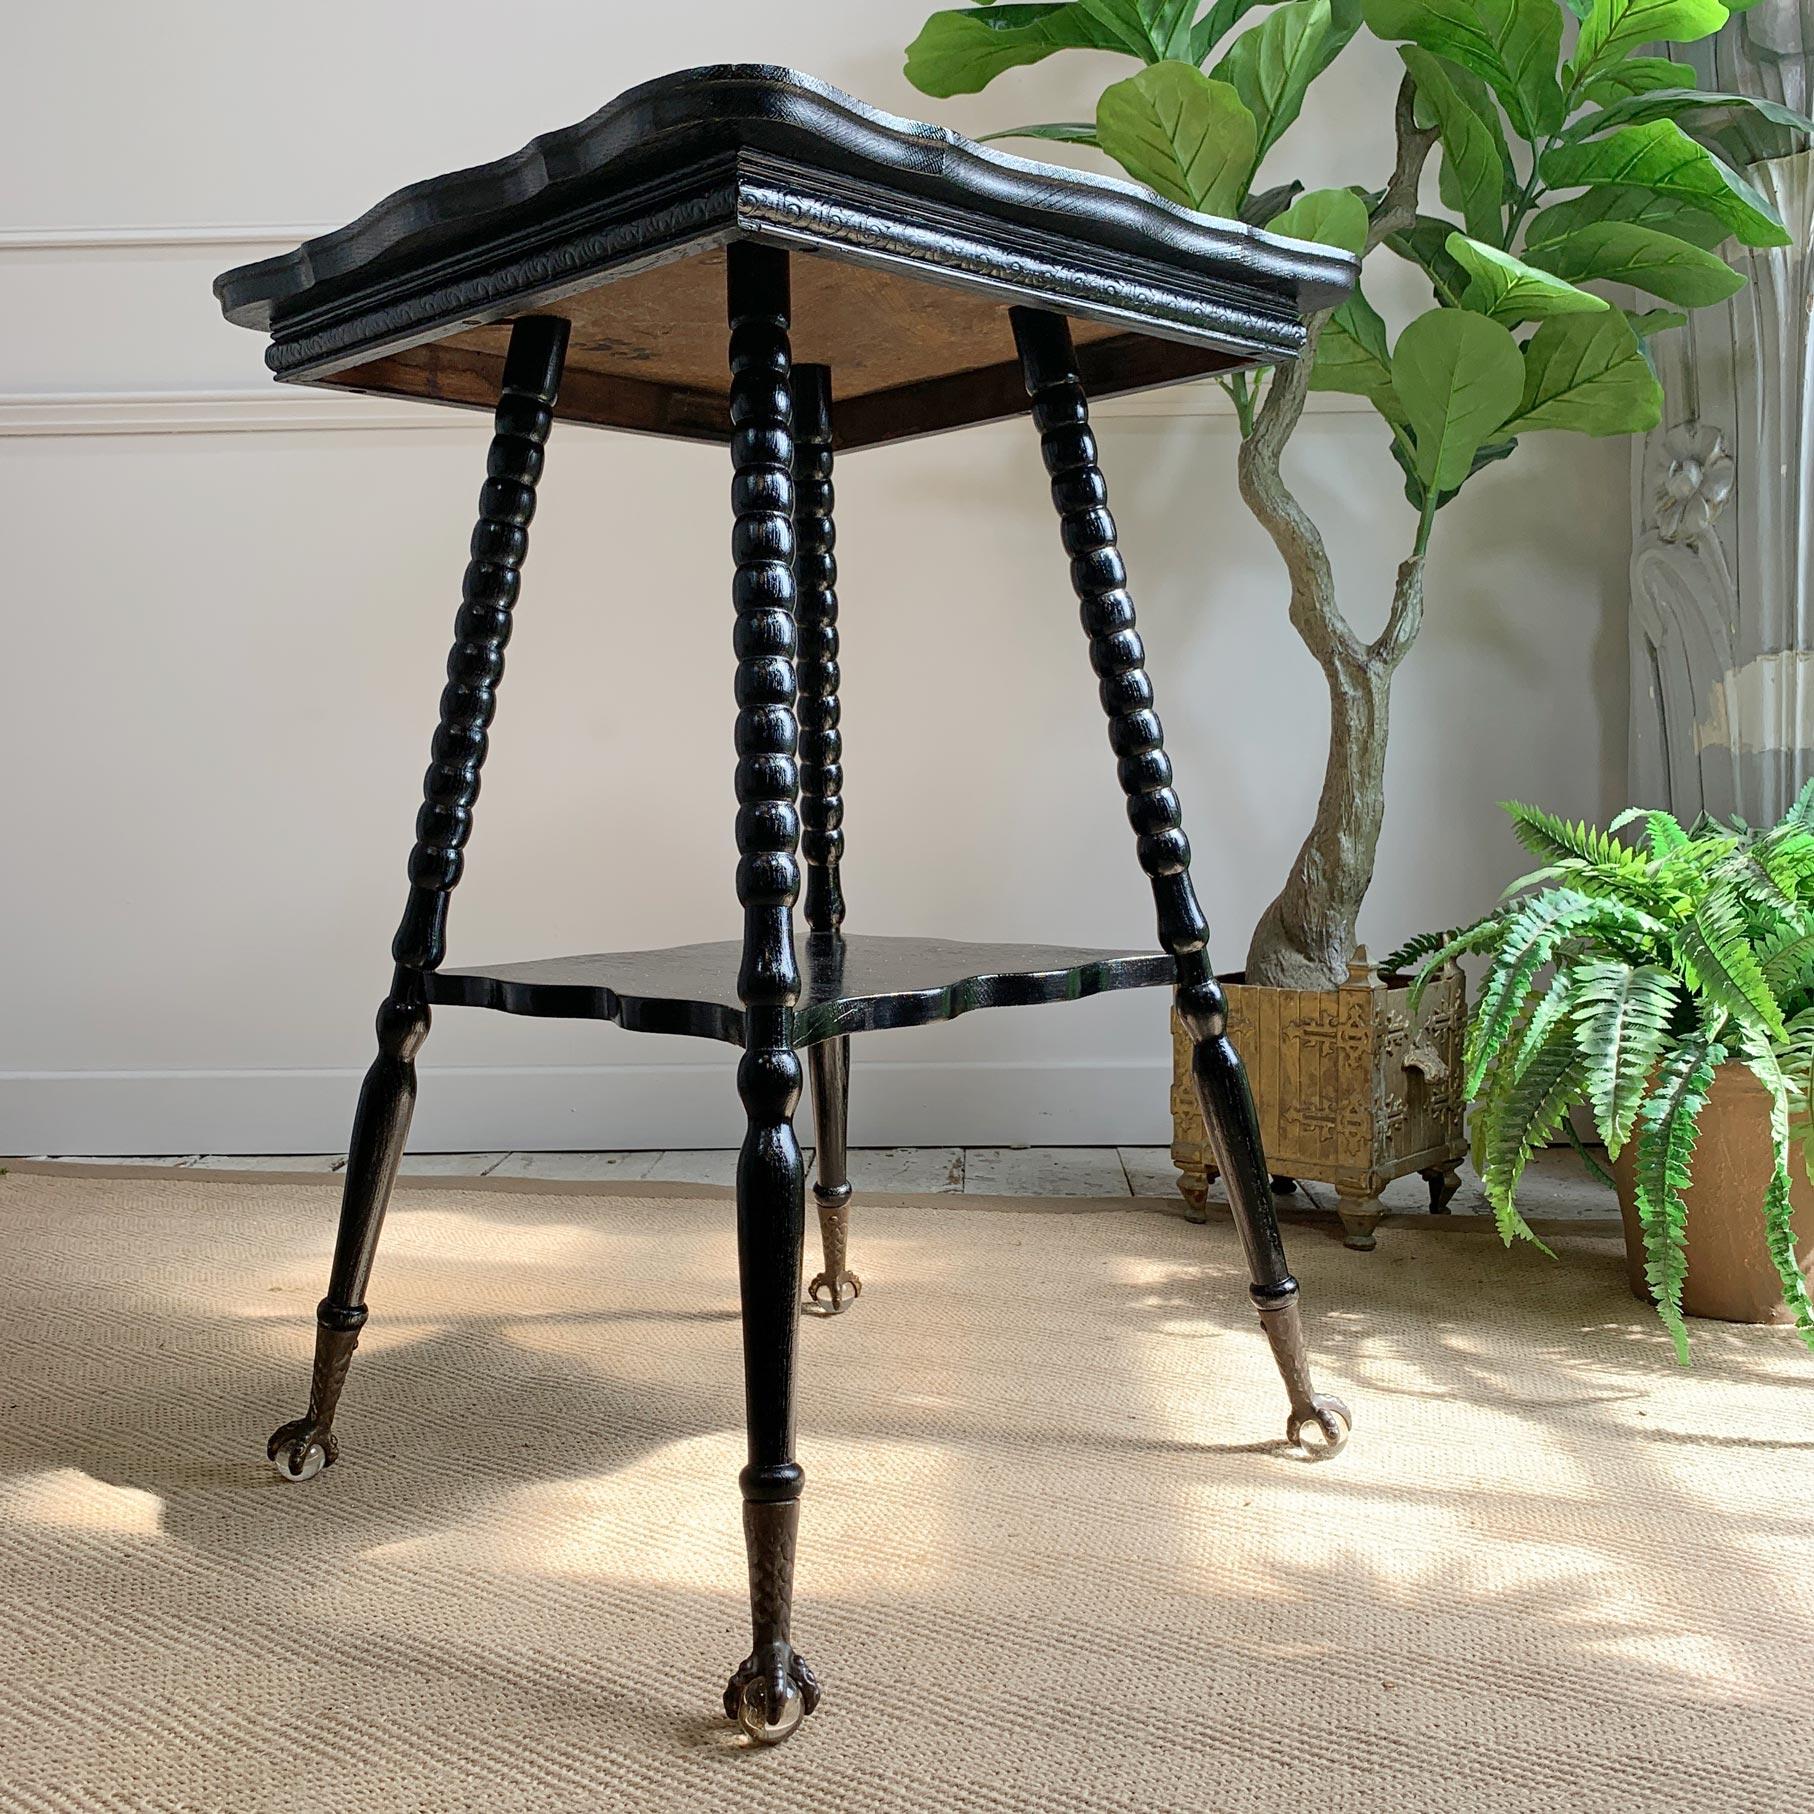 Victorian glass ball and claw ebonised table
C'1870's
Beautiful ebonised side table with turned bobbin legs. There are 4 brass eagle claws holding glass balls for feet, these are original to the table and a fabulous detail. The top of the table has